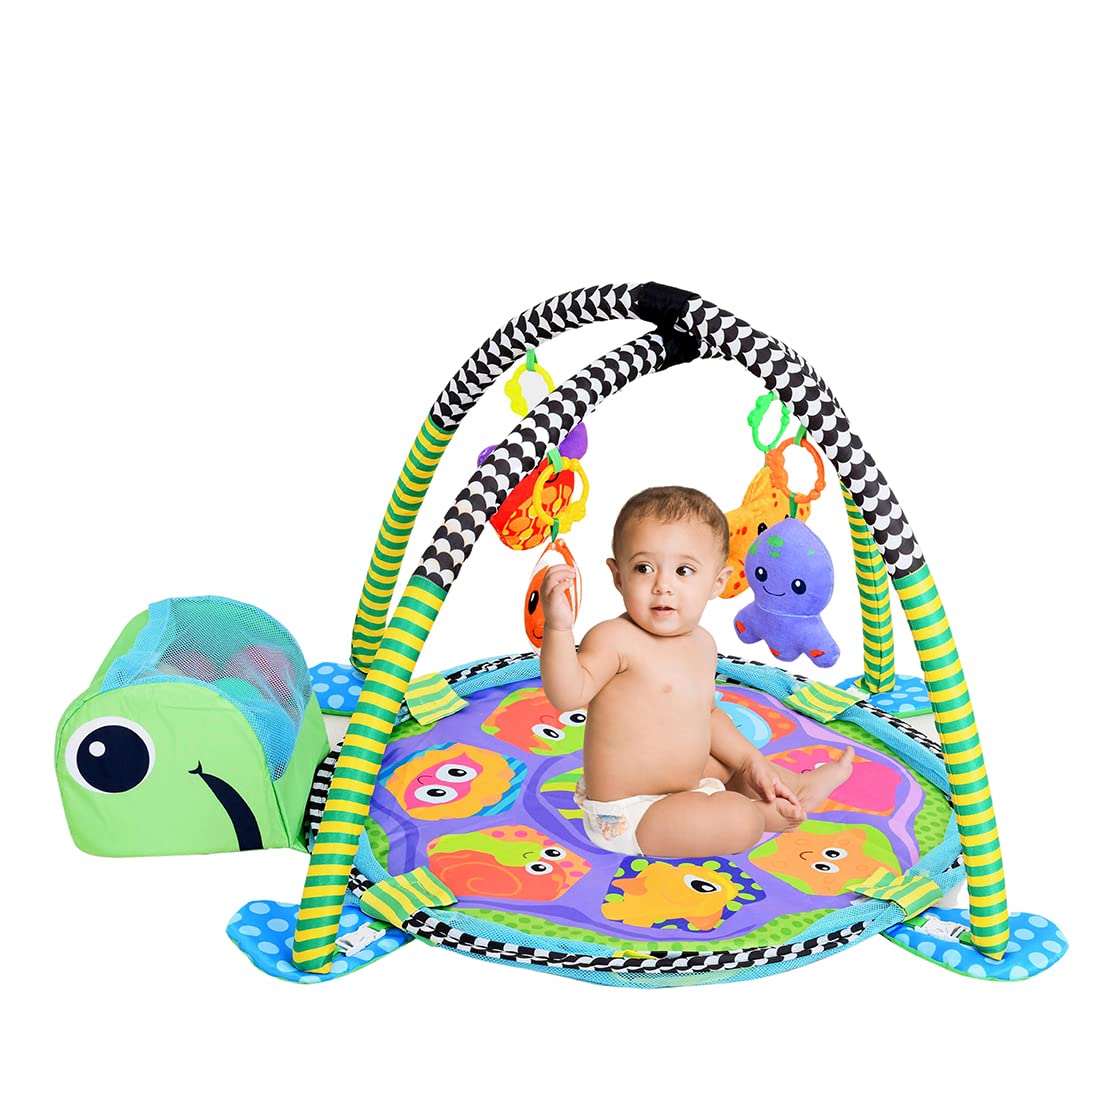 Turtle 3-in-1 Play Gym and Baby Playing Mat